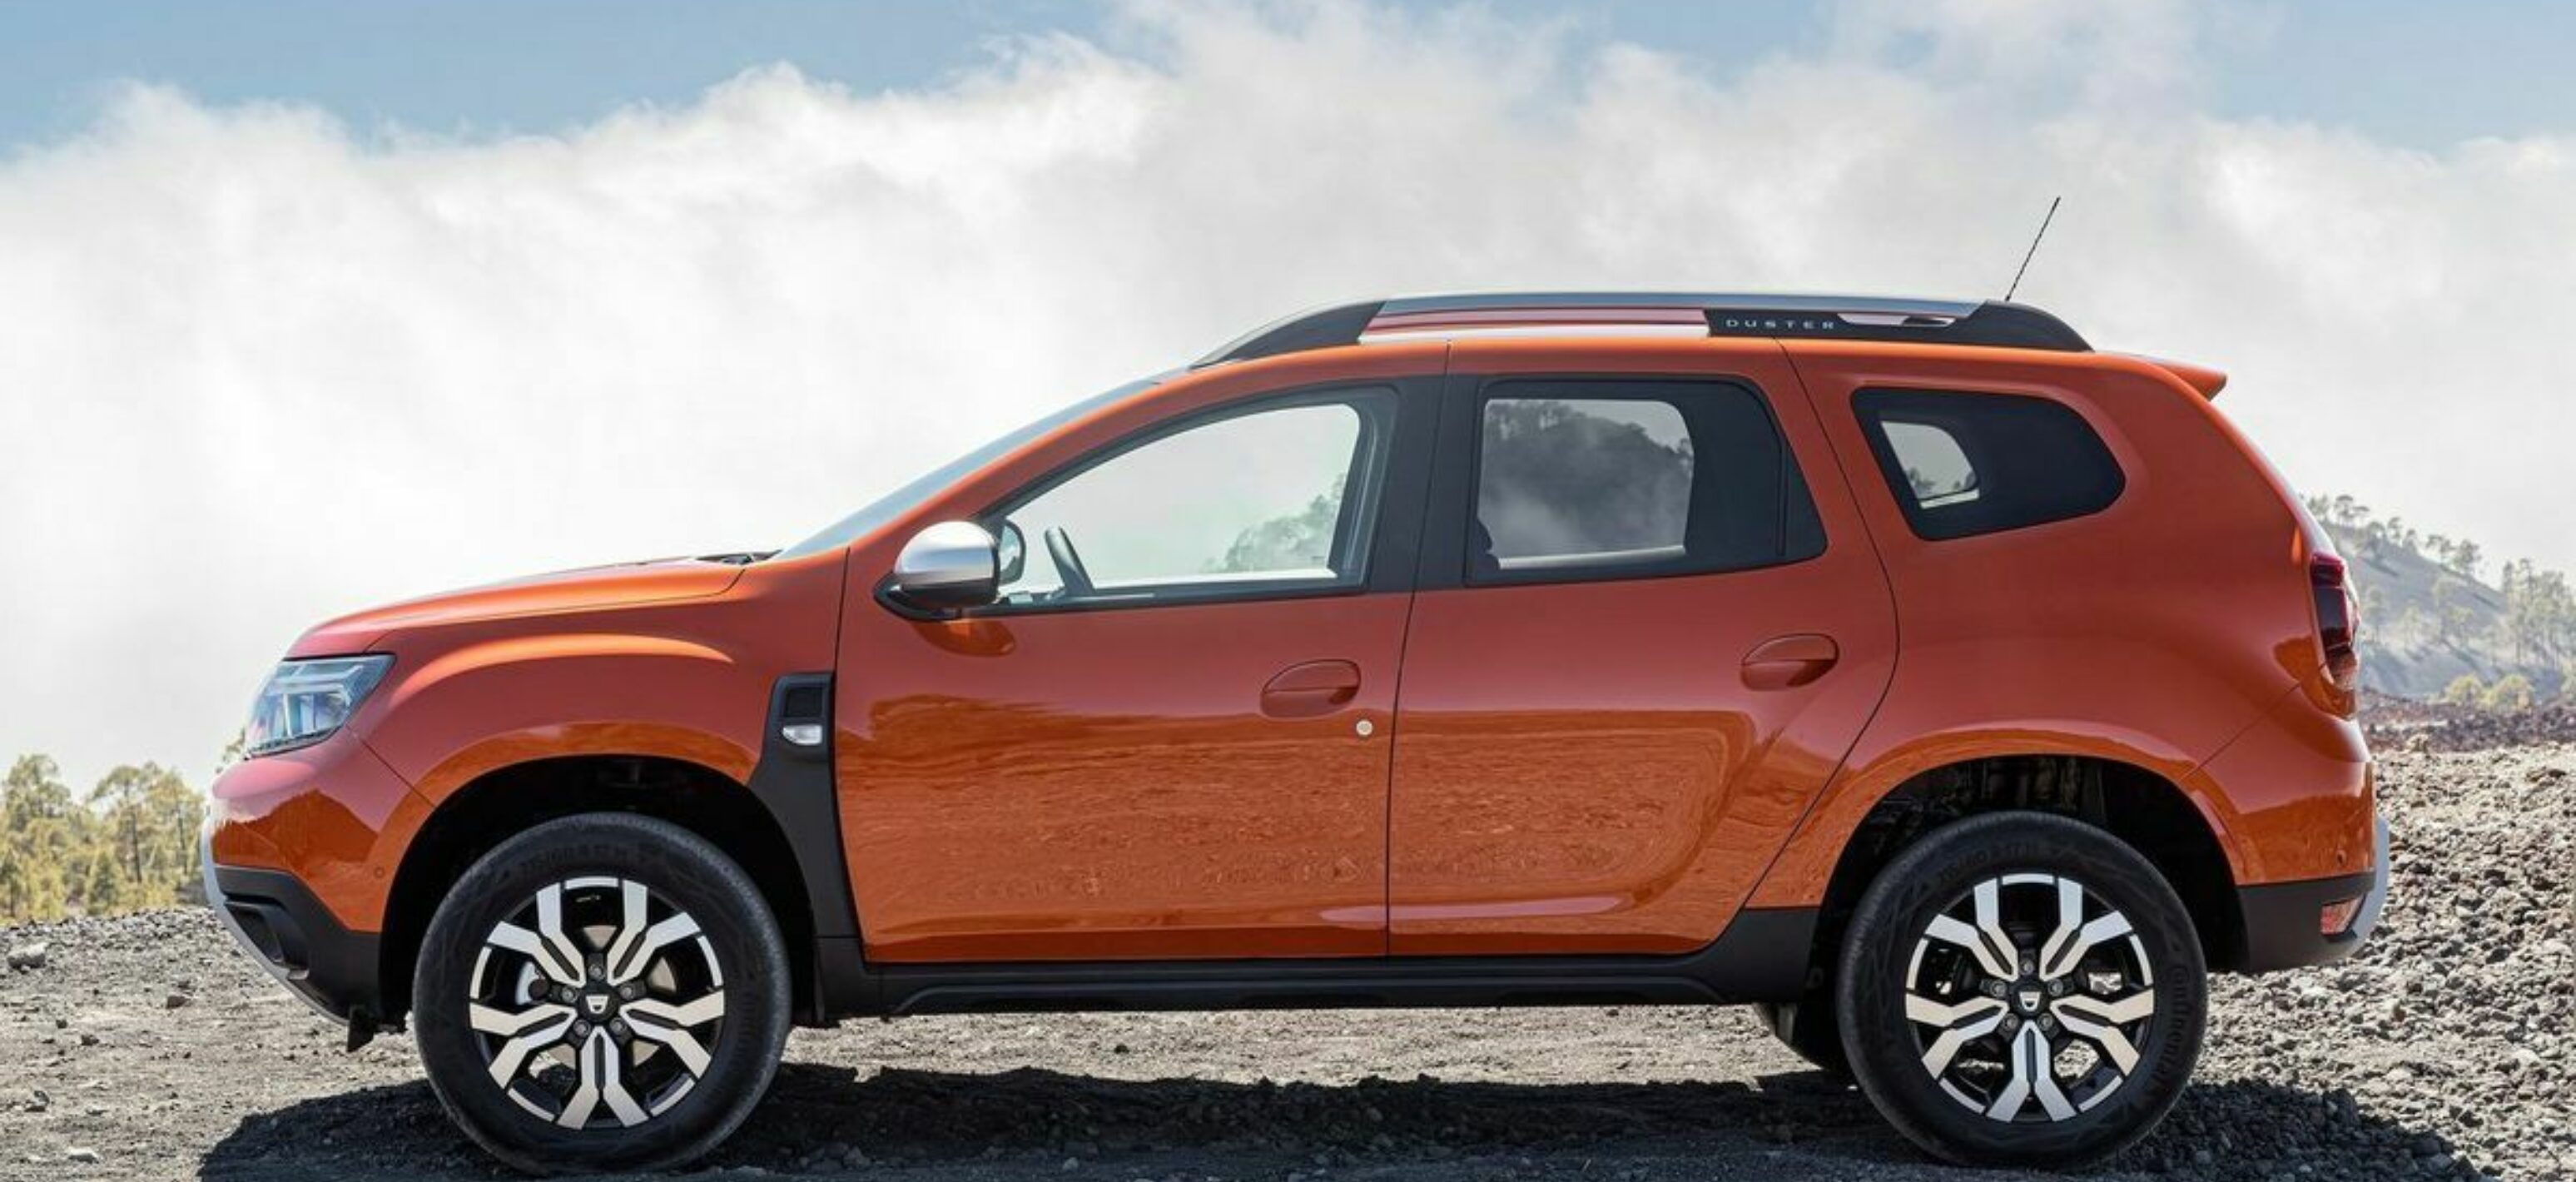 https://autofilter.sk/assets/images/duster/gallery/dacia-duster-2021_33-galeria.jpeg - obrazok